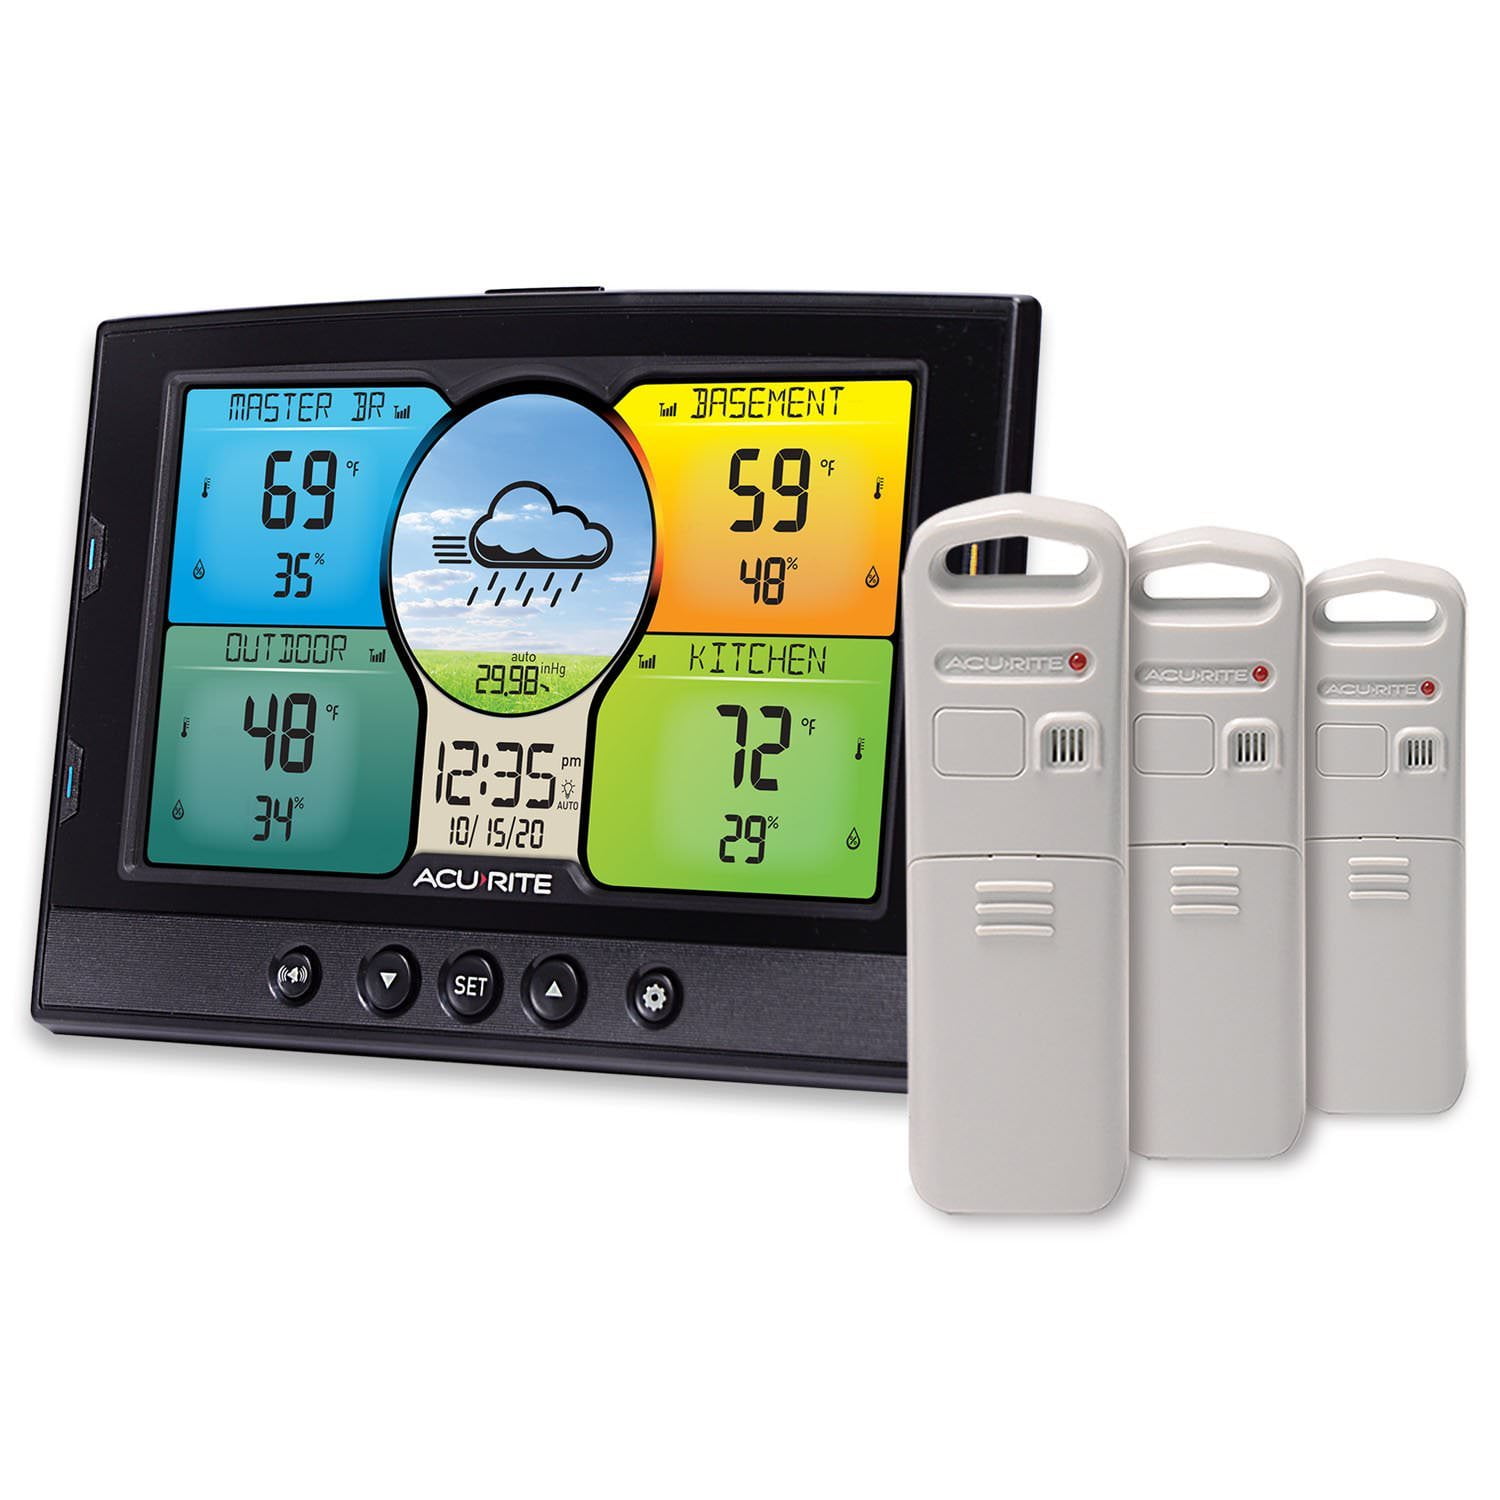 AcuRite Multi-Location Weather Station for Hyperlocal Forecast and  Temperature/Humidity (02082) 